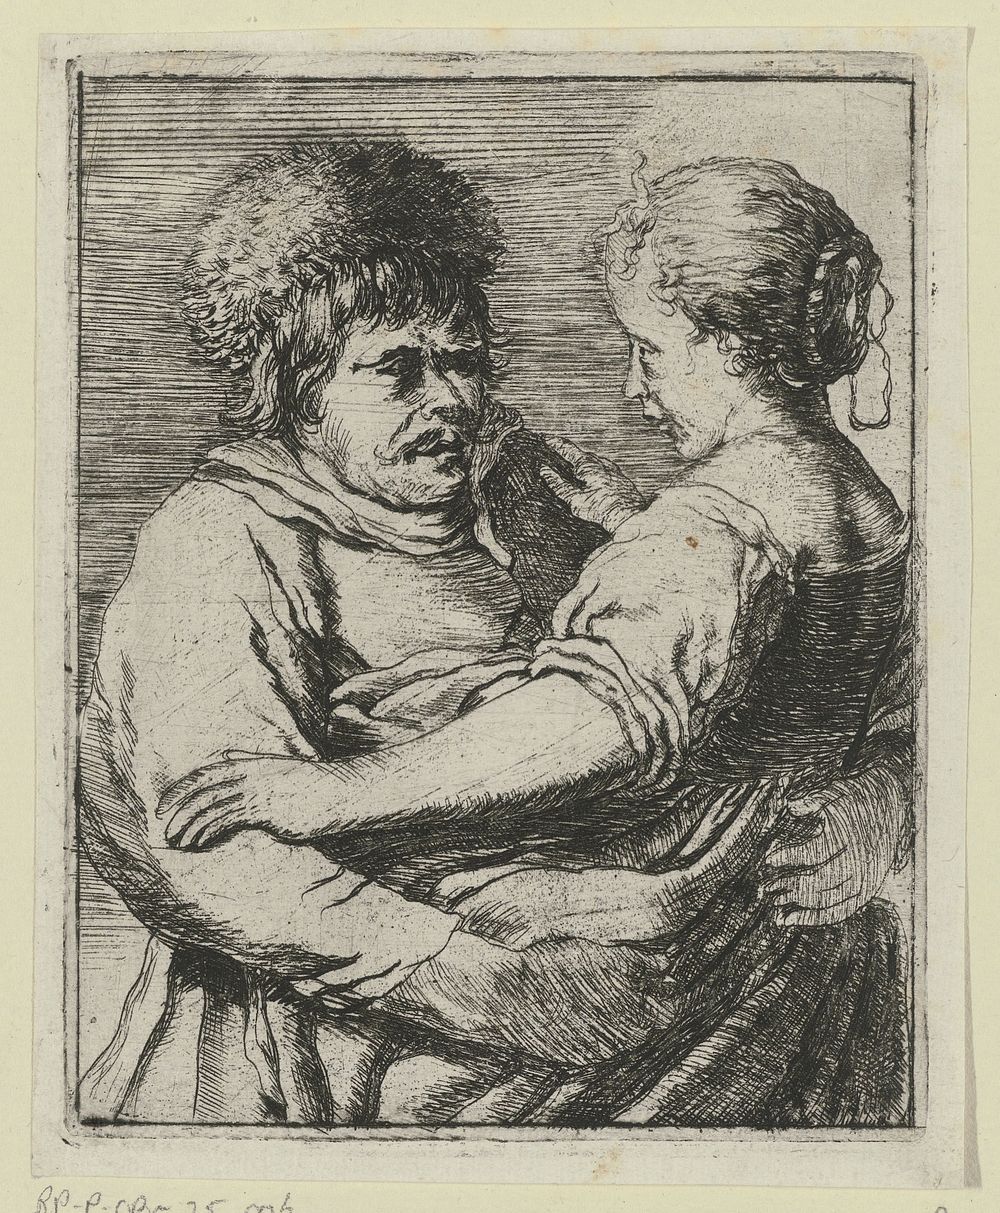 Vrijend paar (1600 - 1700) by anonymous and Johann Liss